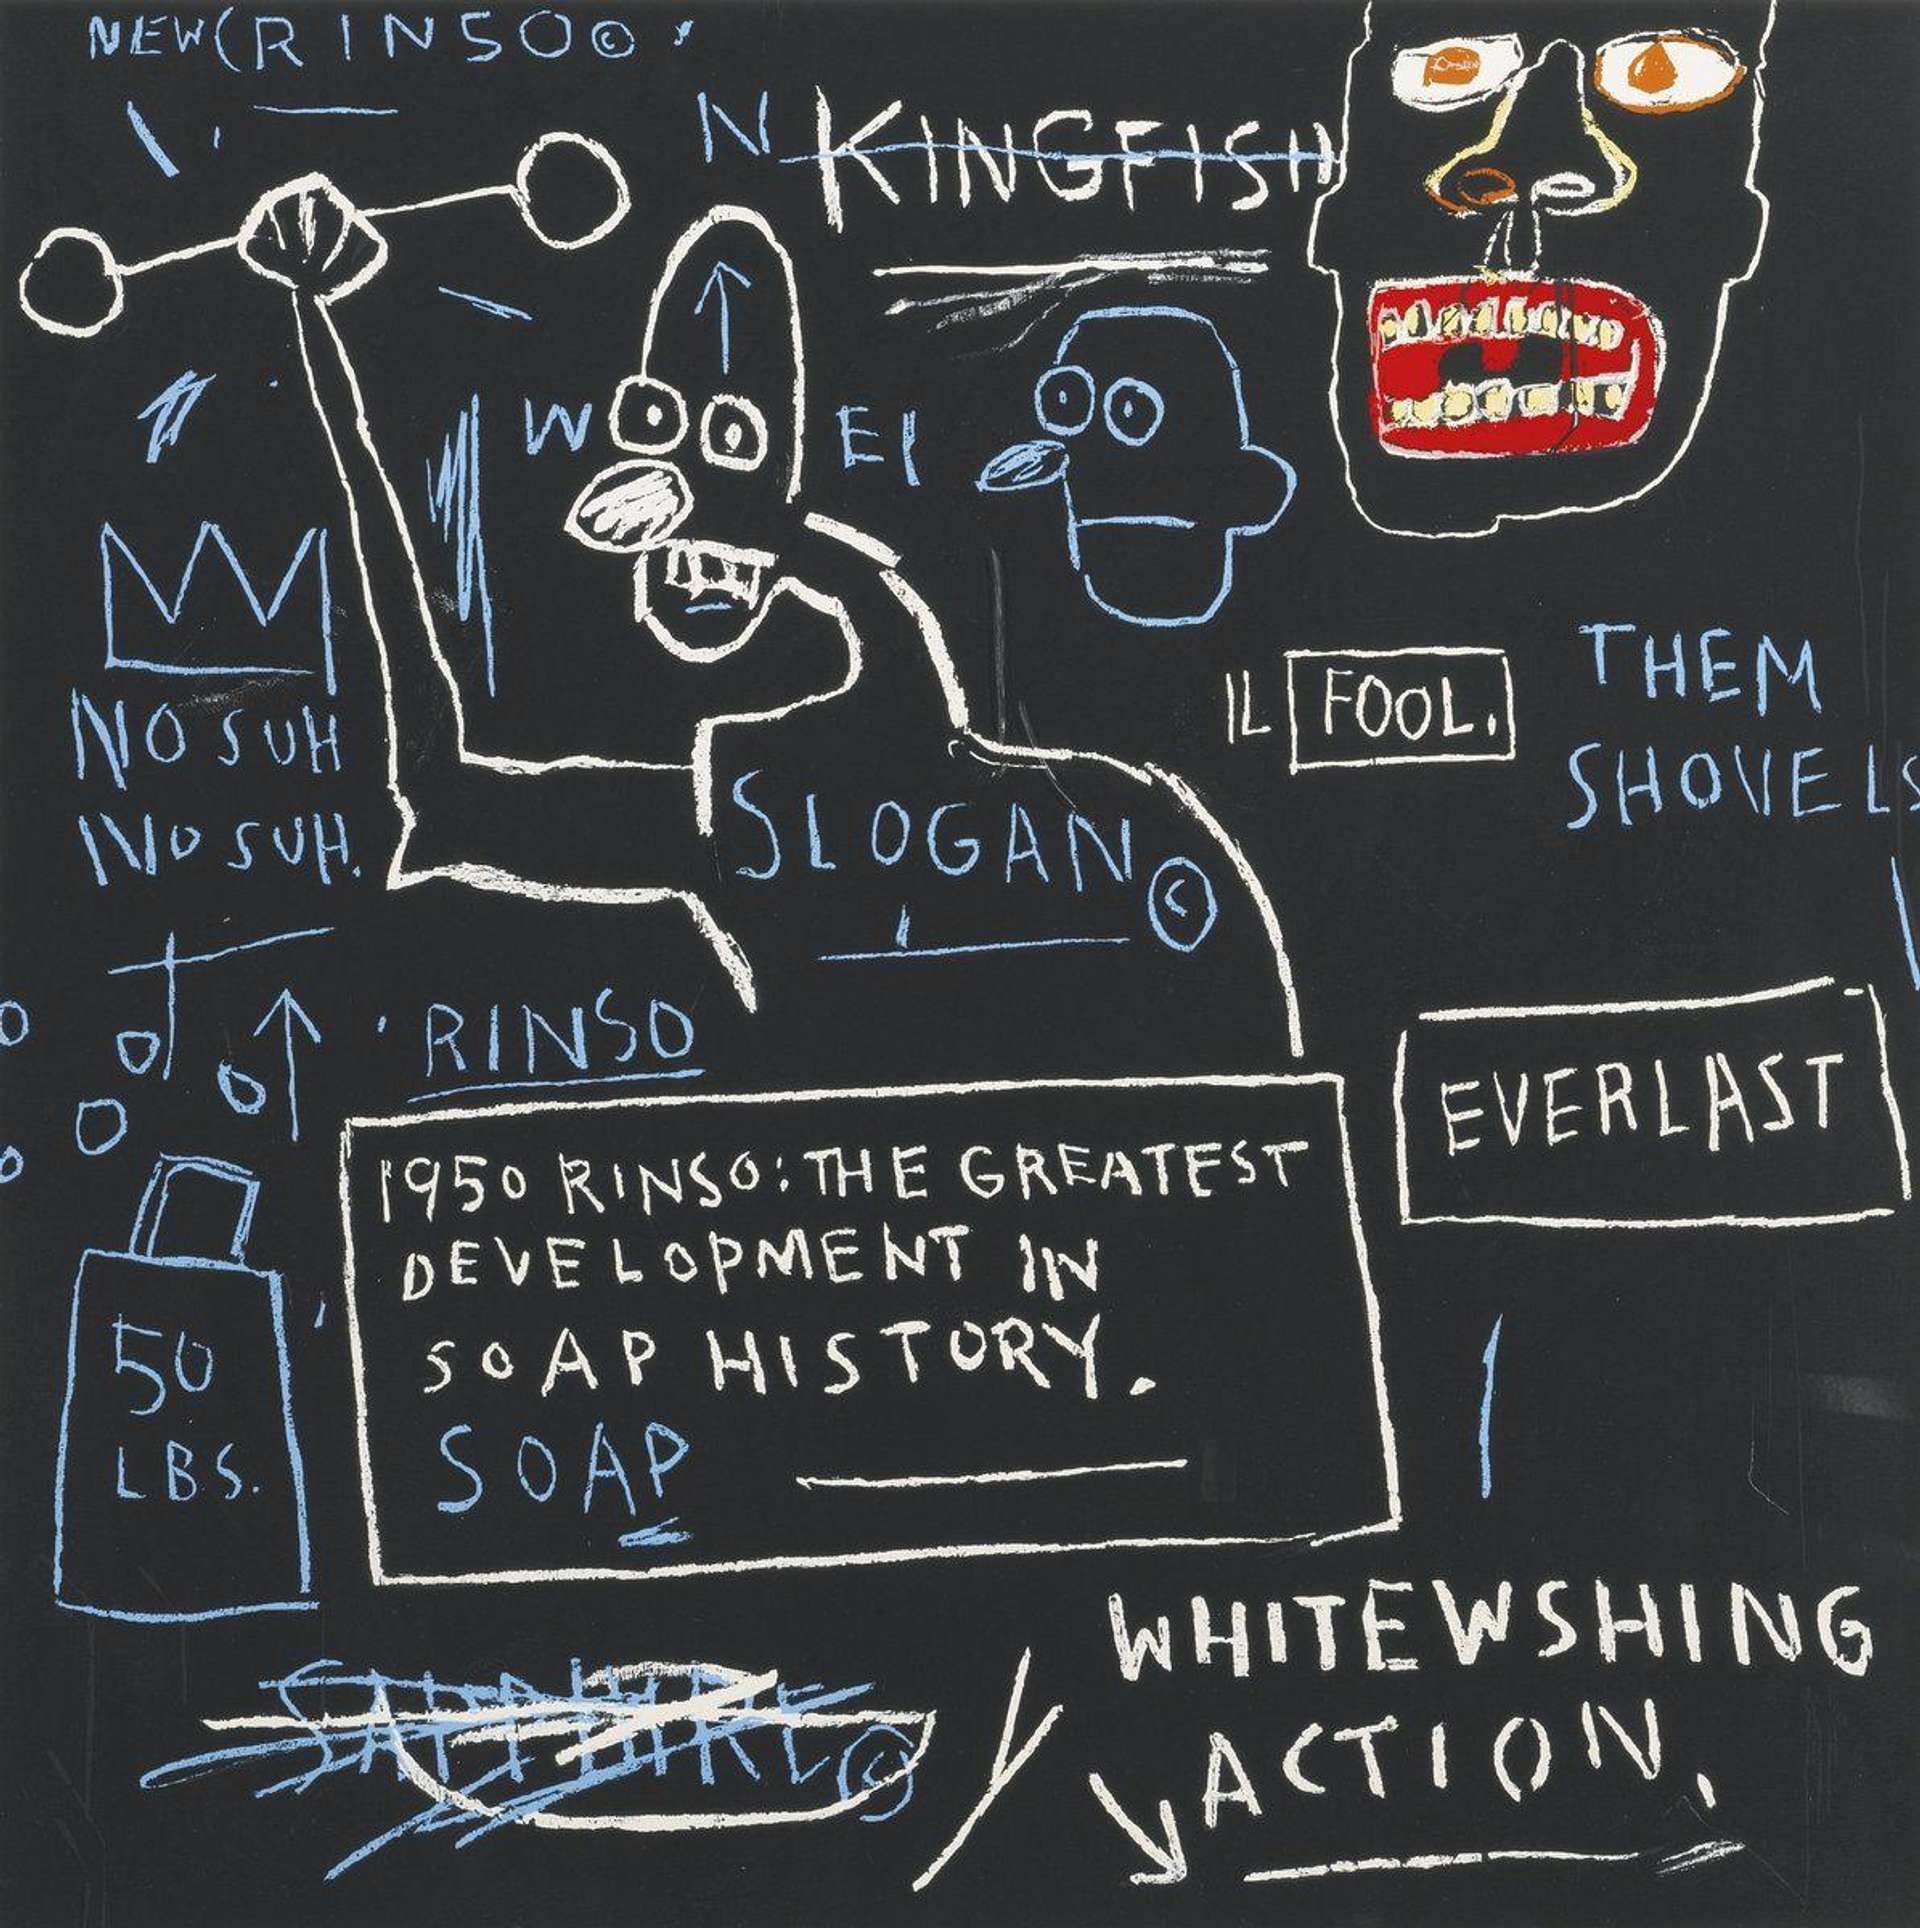 A Guide To Basquiat's Symbols and Meanings